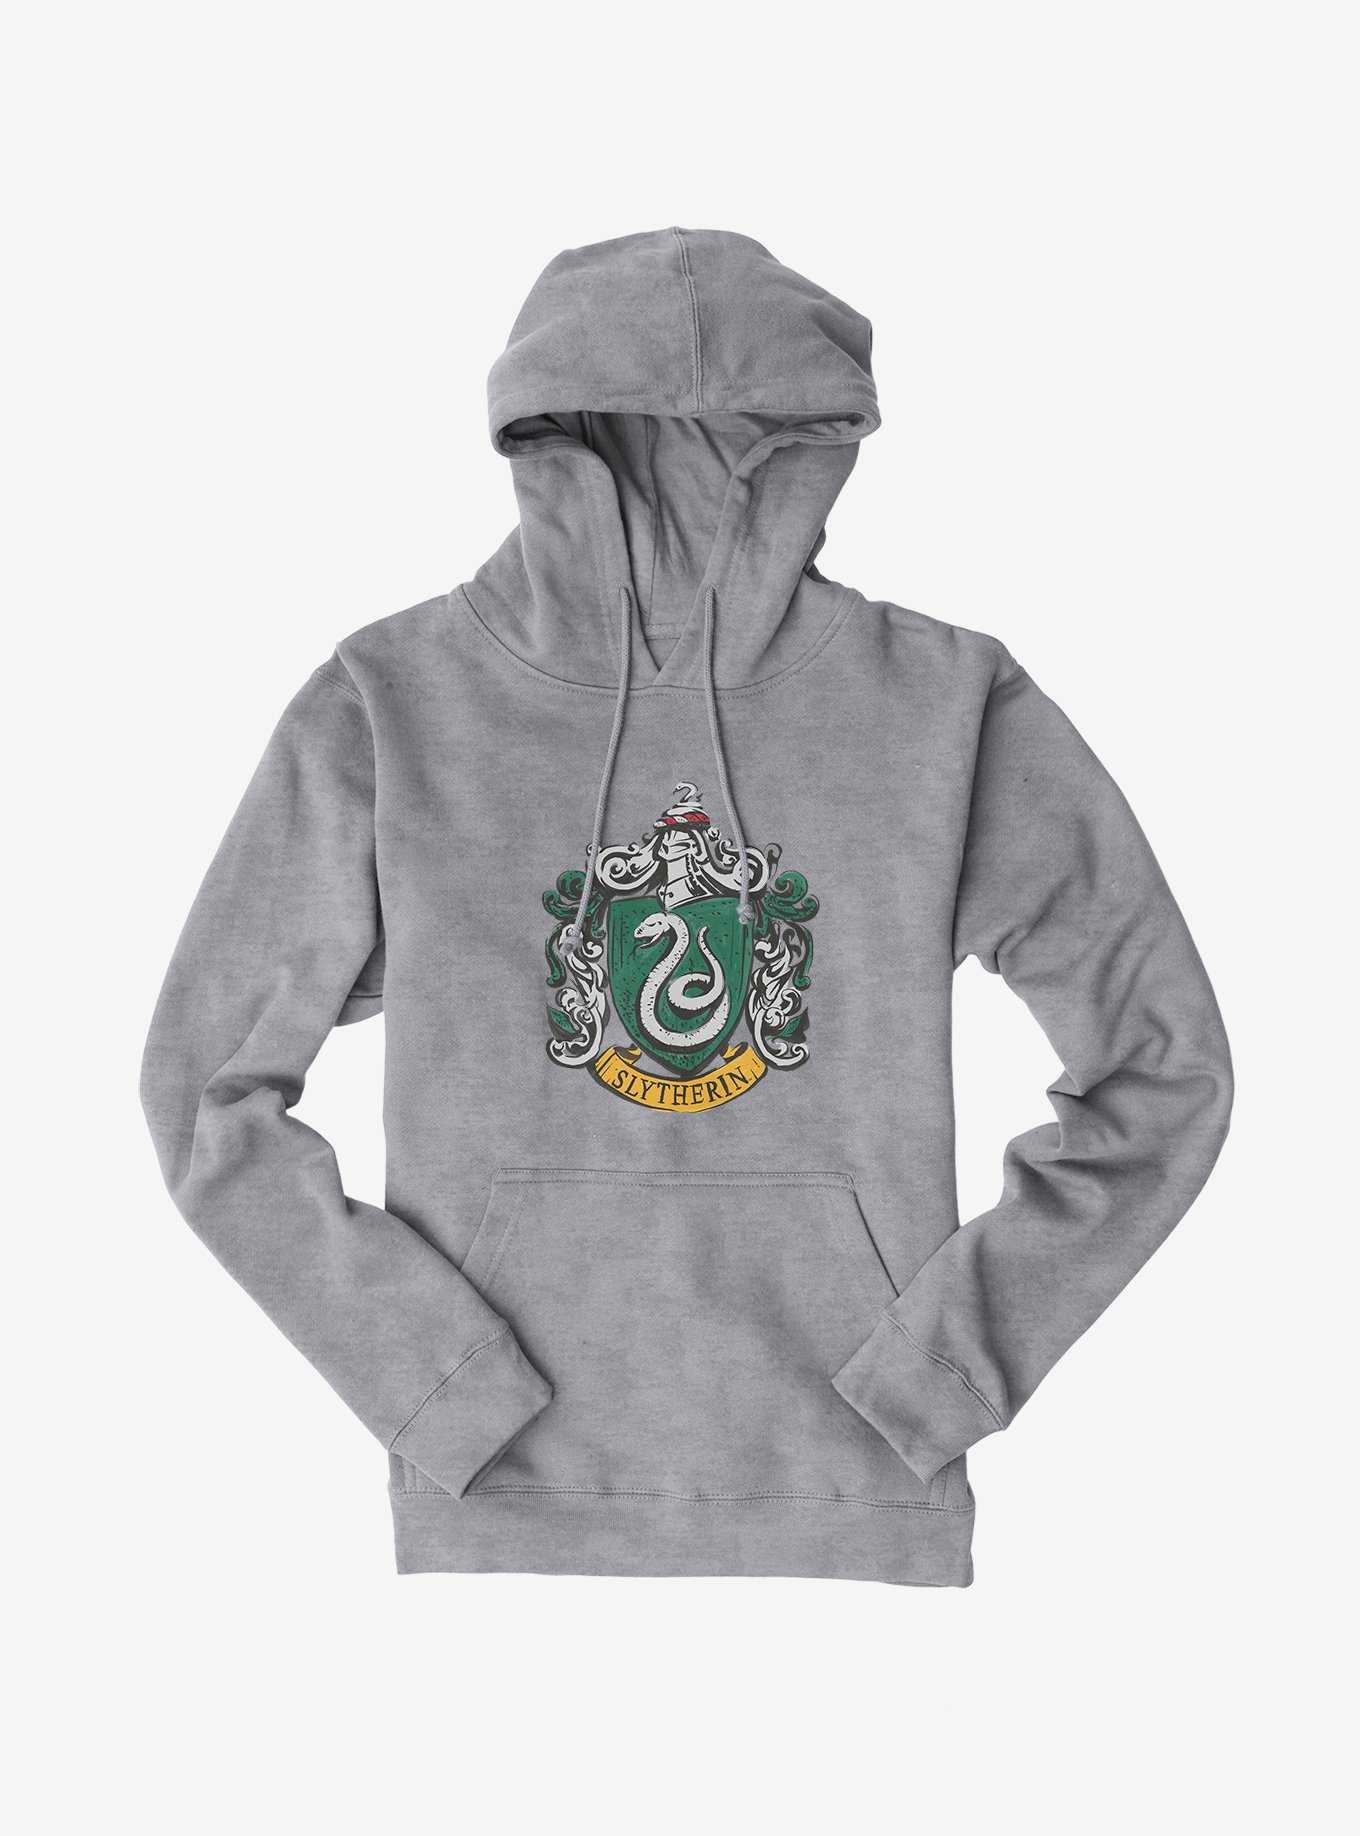 Hoodies OFFICIAL Hot Topic Sweaters Harry | Potter &